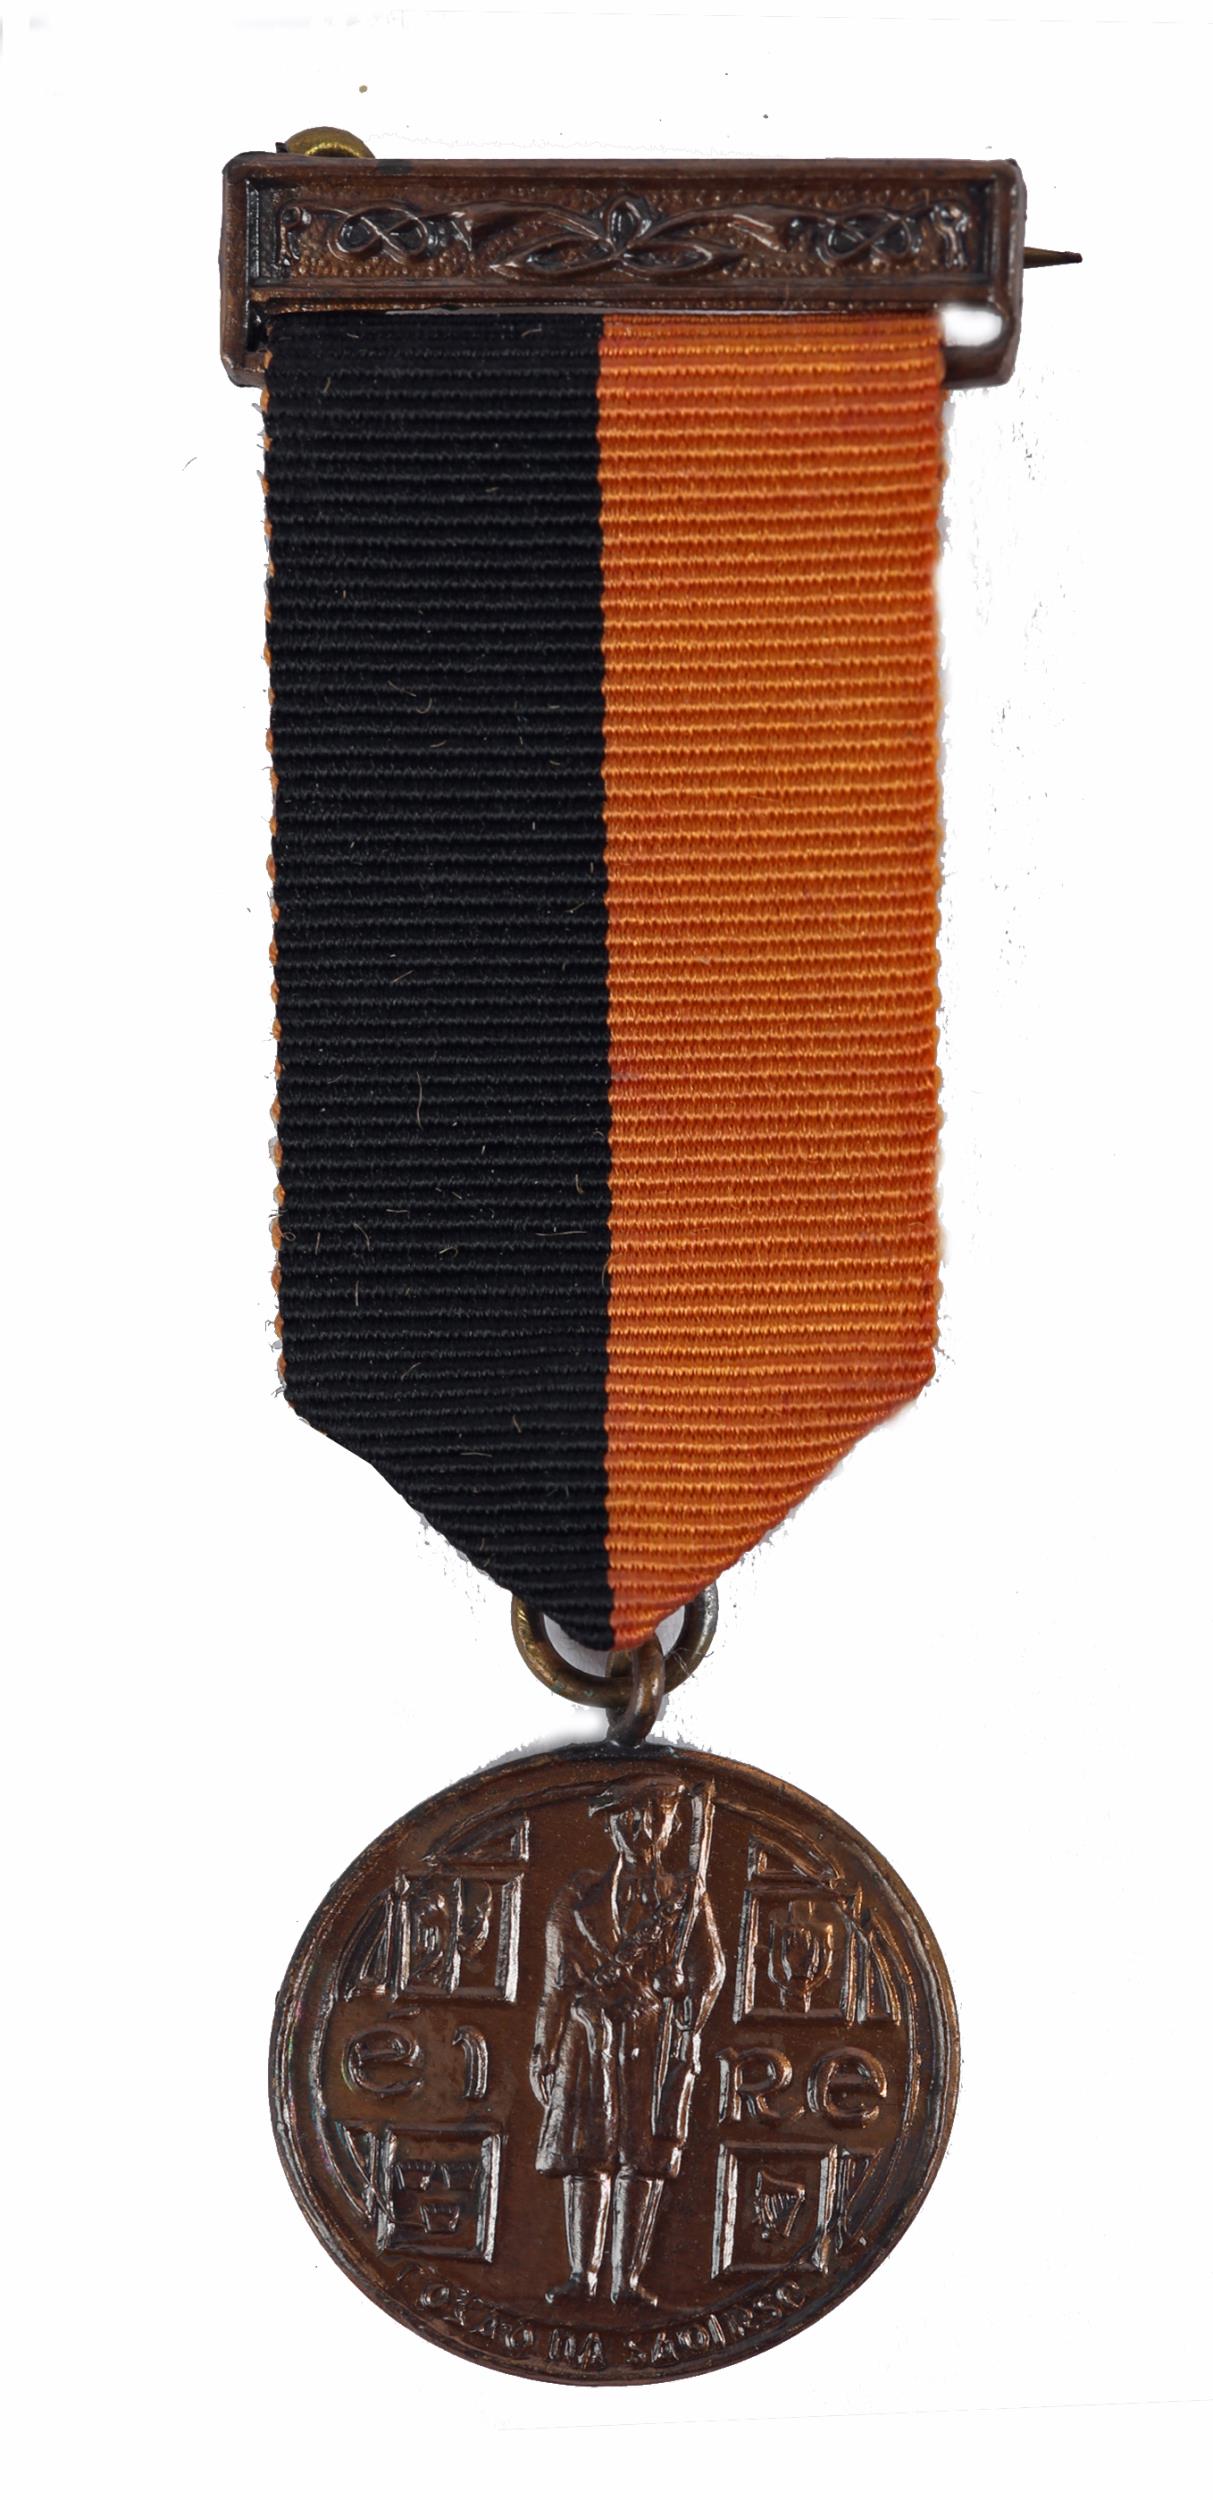 1917-21 War of Independence Service Medal miniature, to an unknown recipient.